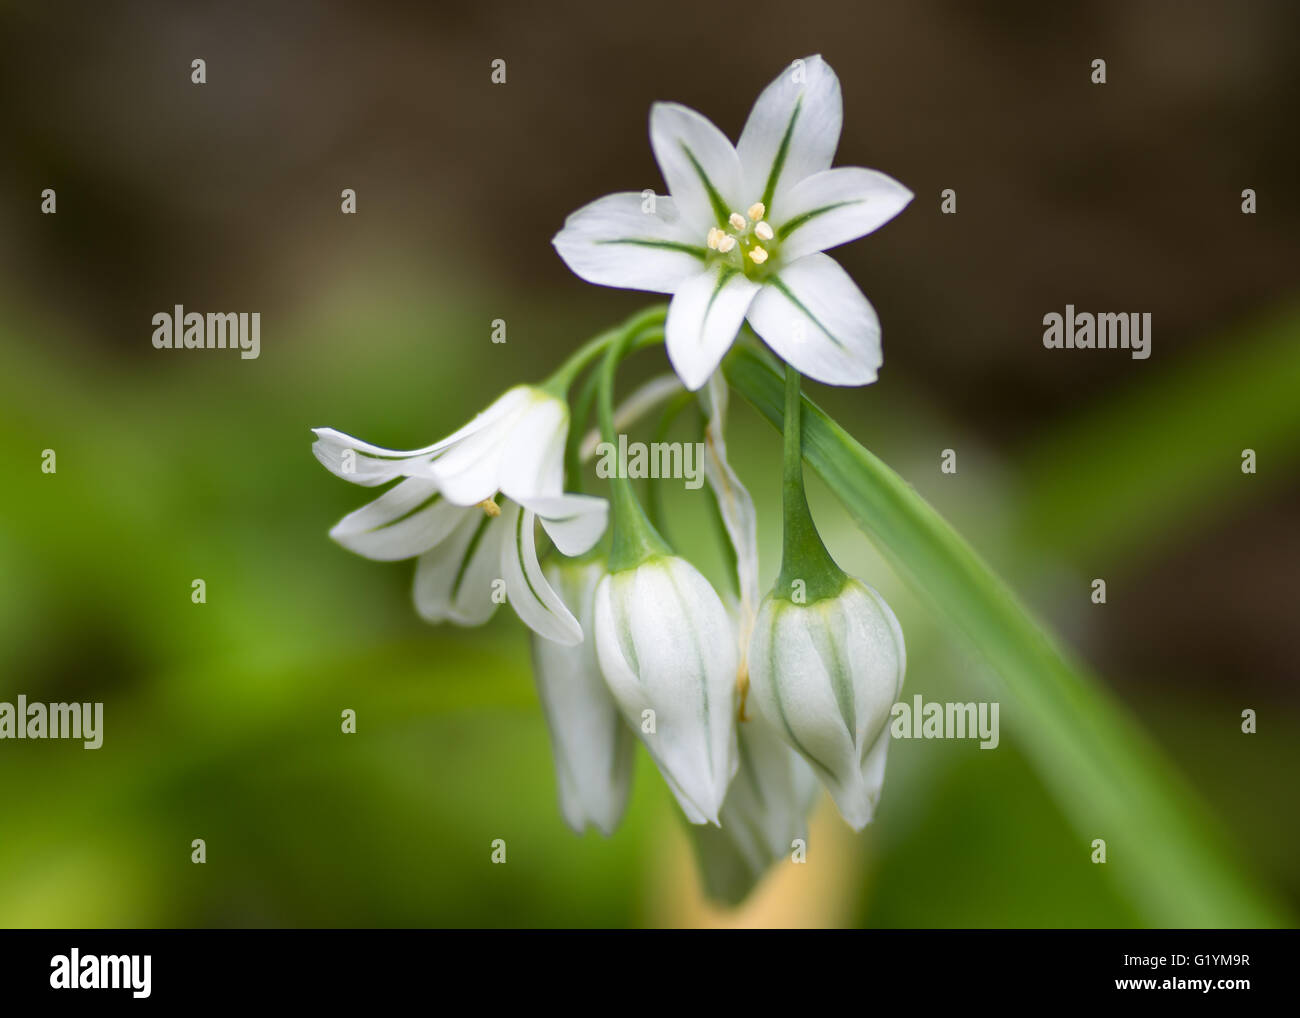 Three-cornered garlic (Allium triquetrum) in flower. Drooping, bell-shaped flowers of plant in the family Amaryllidaceae Stock Photo